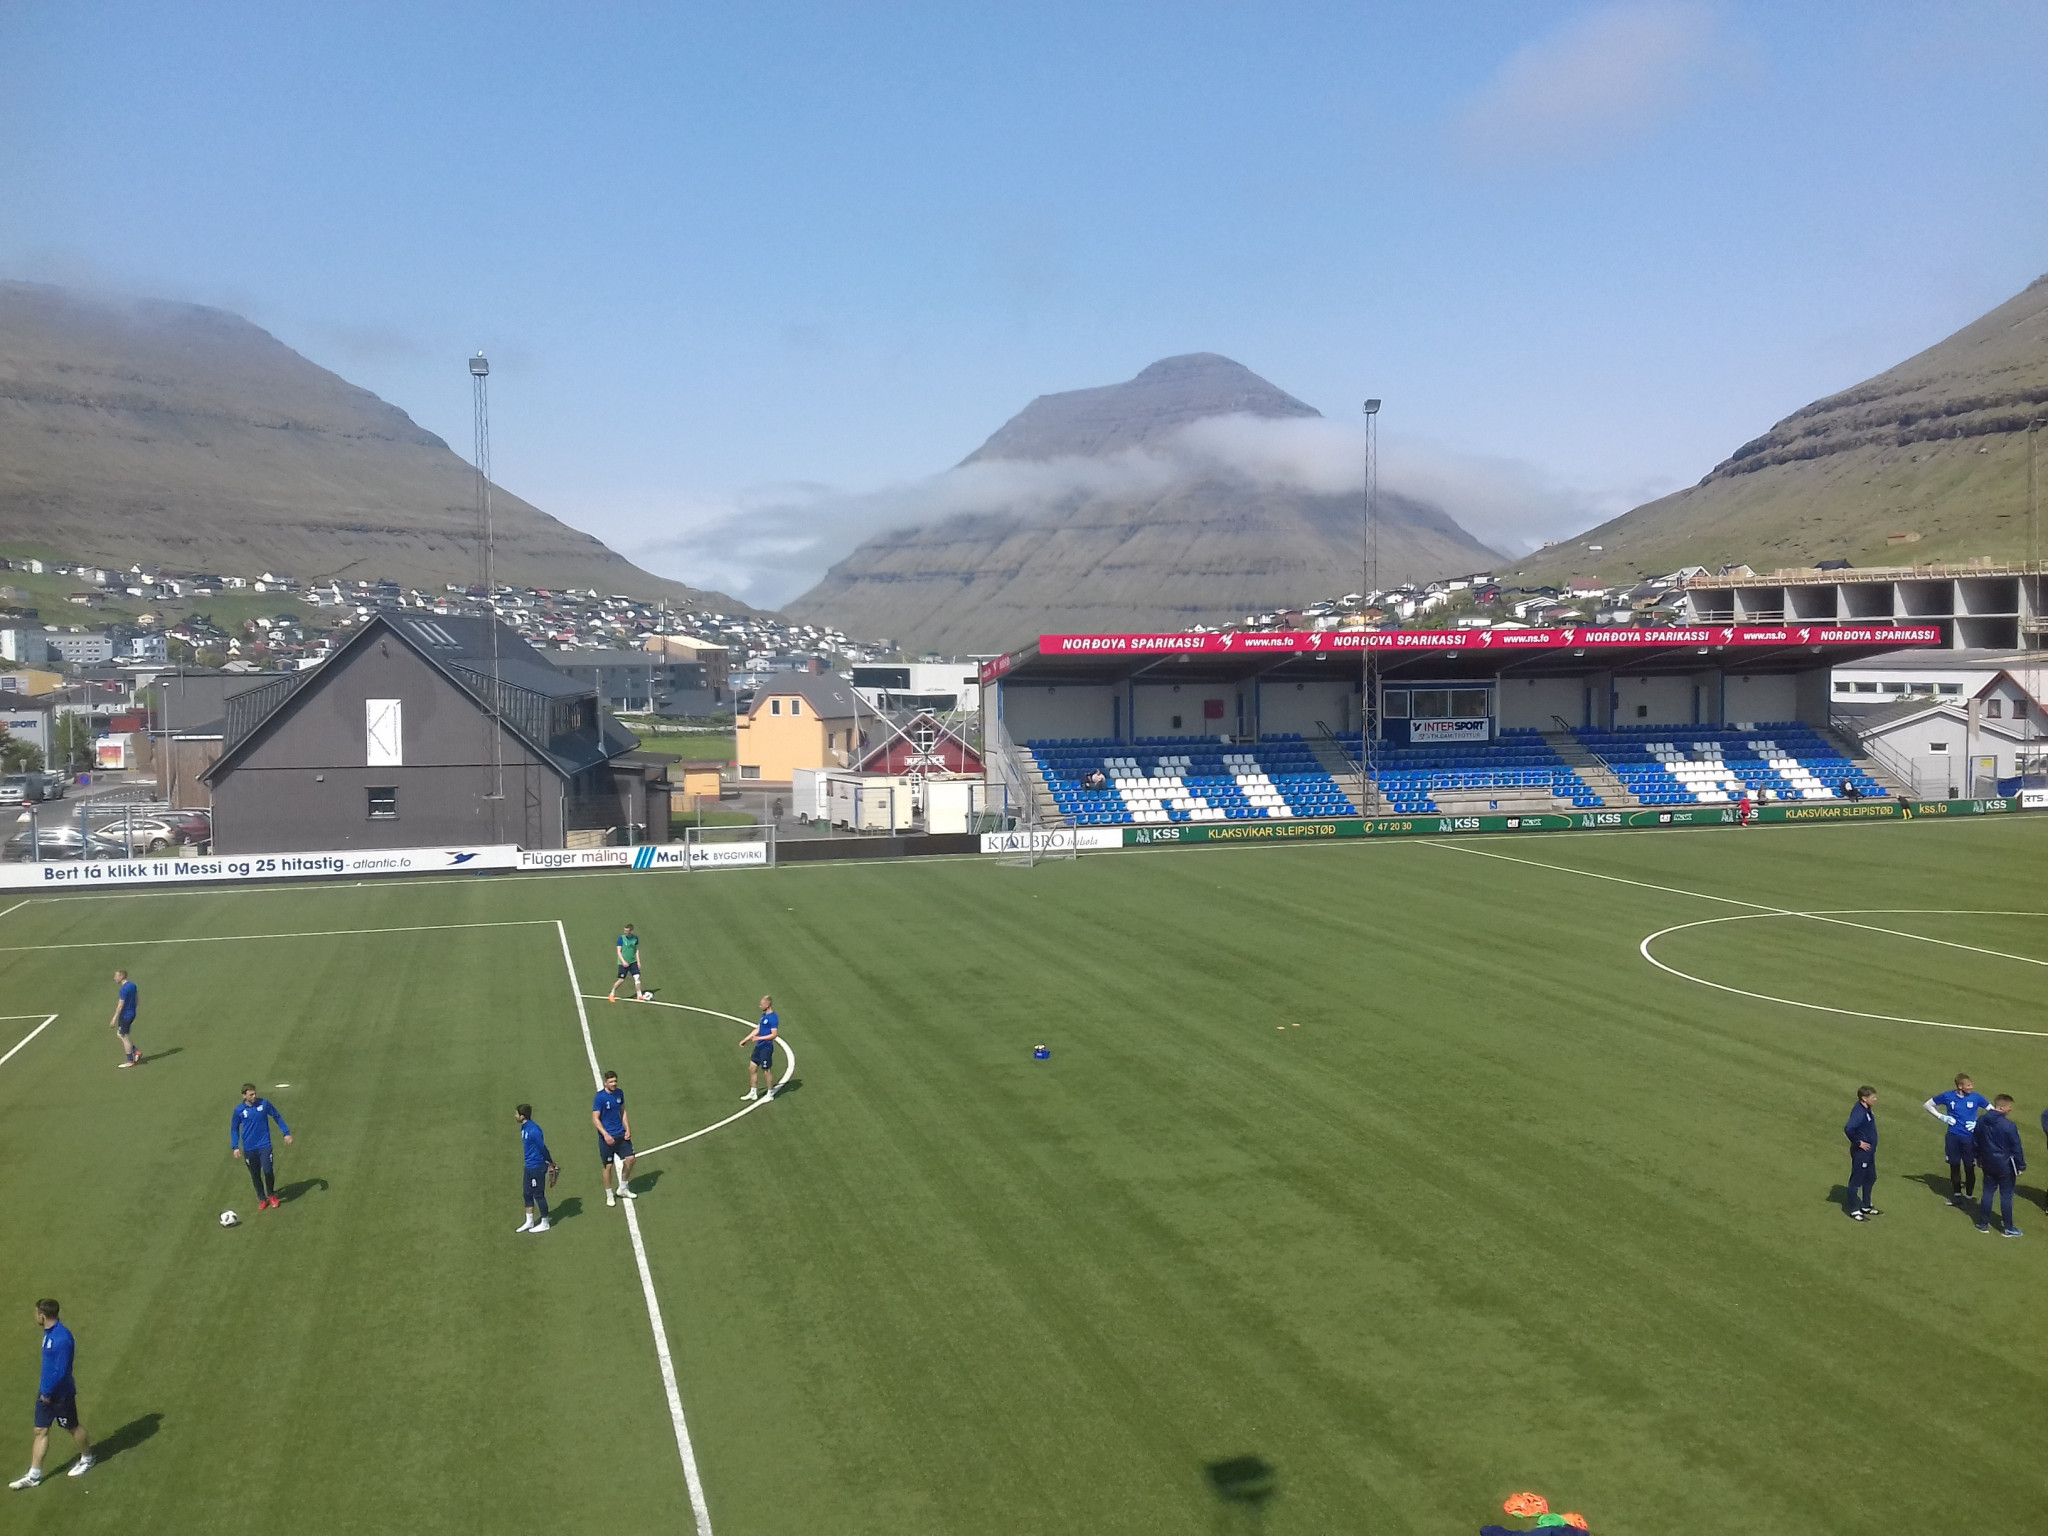 The Faroe Islands believe UEFA and FIFA recognition has boosted facilities and athletes' prospects ©ITG